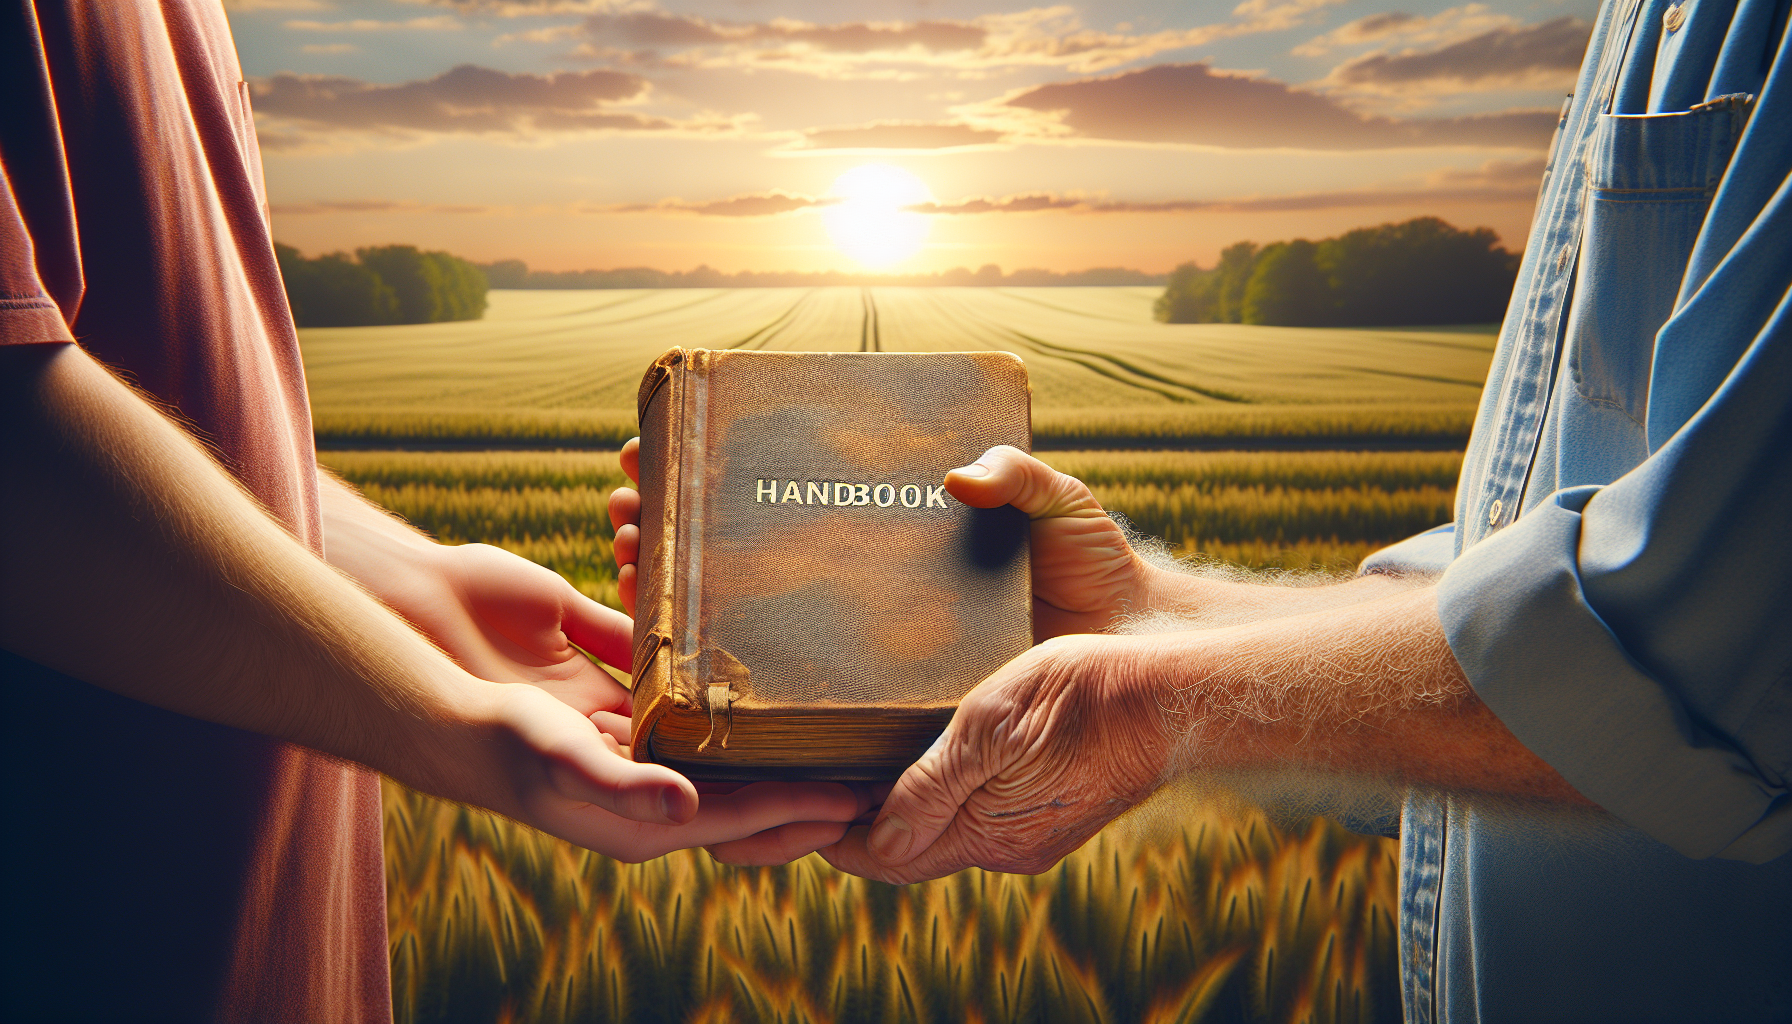 An illustration of hands exchanging a handbook, reflecting the distribution and accessibility of the employee handbook in Kentucky.